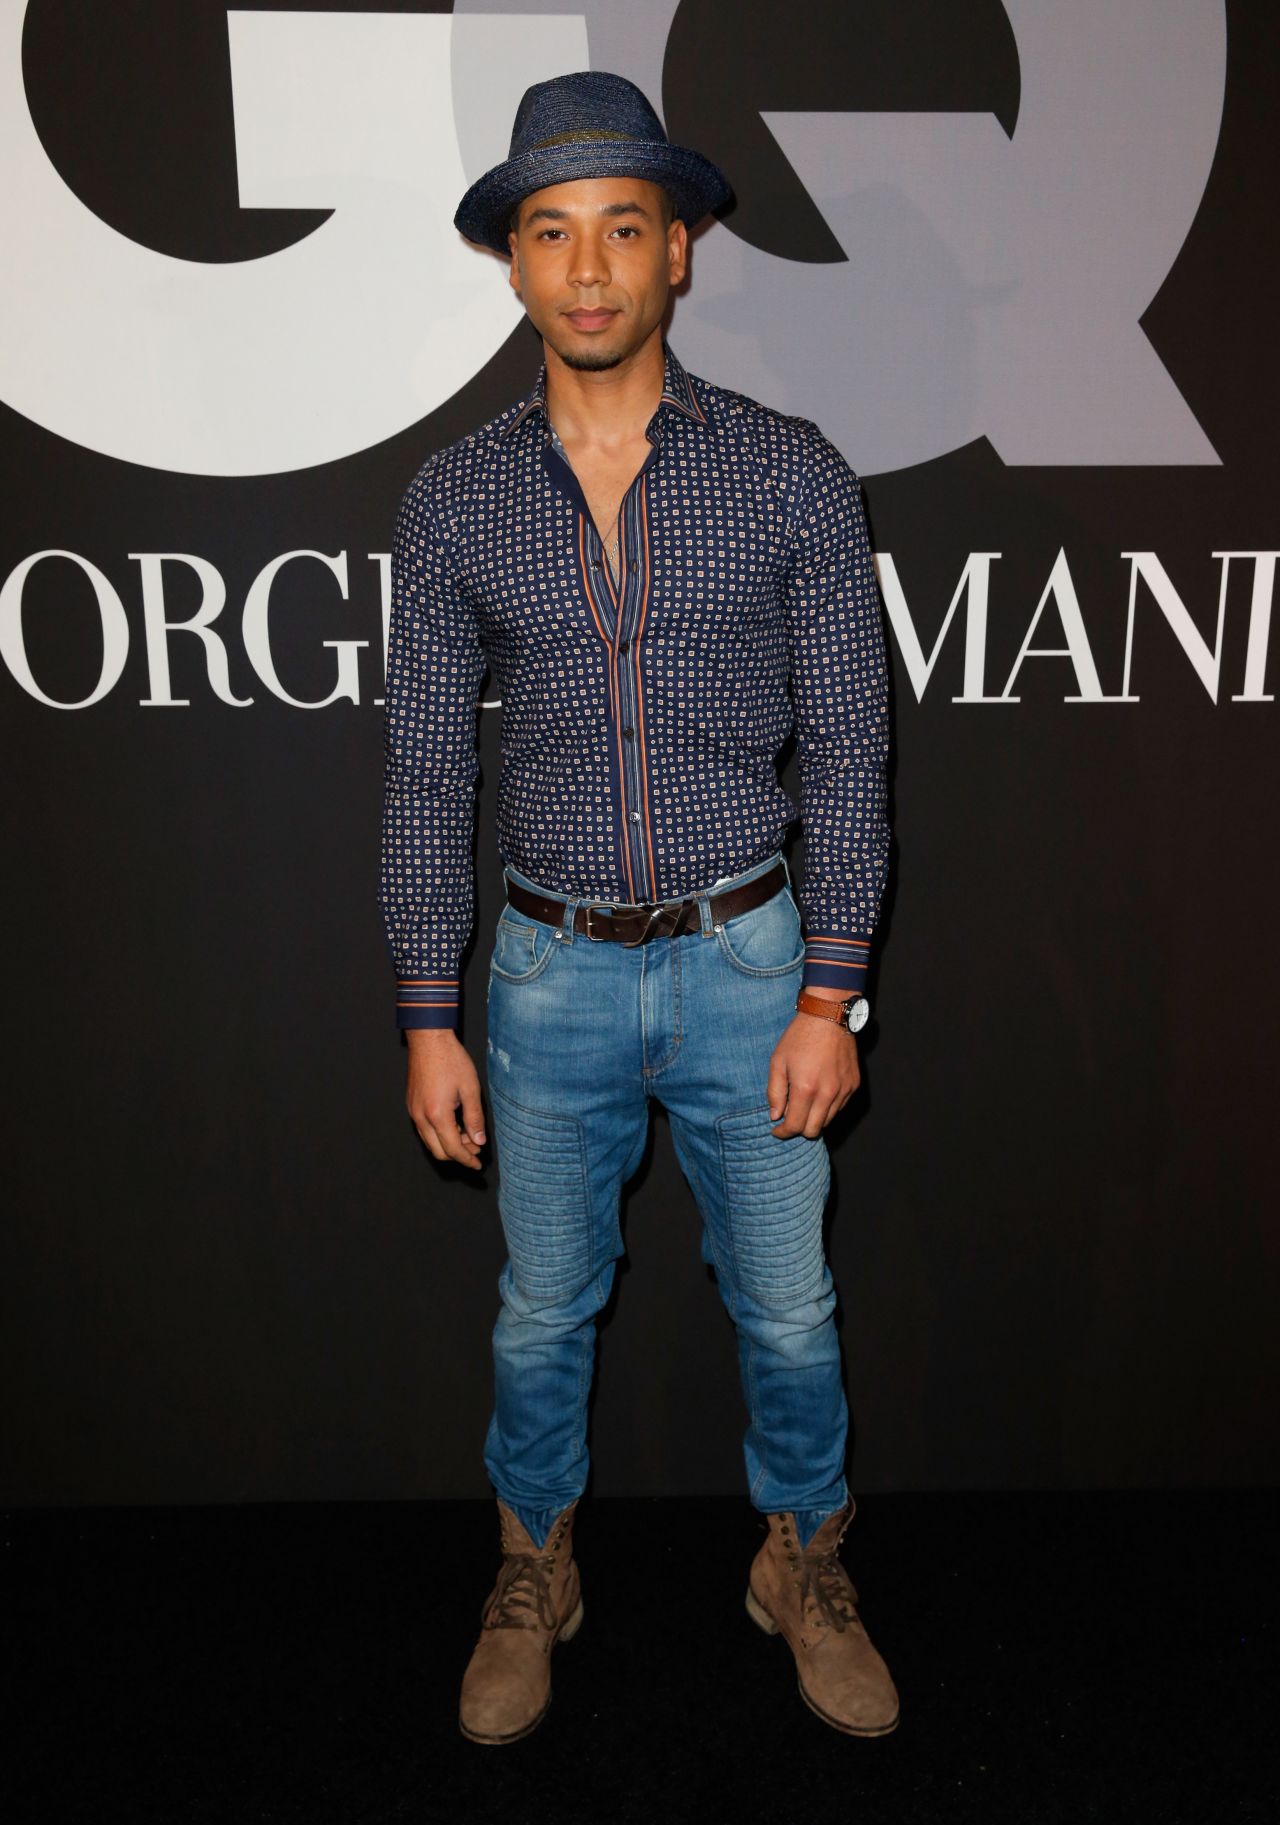 Jussie Smollett's character, Jamal Lyon, on the Fox TV show "Empire" came out, and so did the actor. Smollett confirmed that he is gay during <a href="https://www.youtube.com/watch?v=ivoLY9XhMBs" target="_blank" target="_blank">a chat with Ellen DeGeneres</a>. Earlier, his co-star Malik Yoba had been quoted saying that "I know Jussie; he is gay, and he's very committed to issues around the LGBT community." Yoba later said <a href="http://www.bet.com/news/celebrities/2015/03/05/malik-yoba-claims-he-was-misquoted-about-jussie-smollett-s-sexuality.html" target="_blank" target="_blank">he had been misquoted. </a>